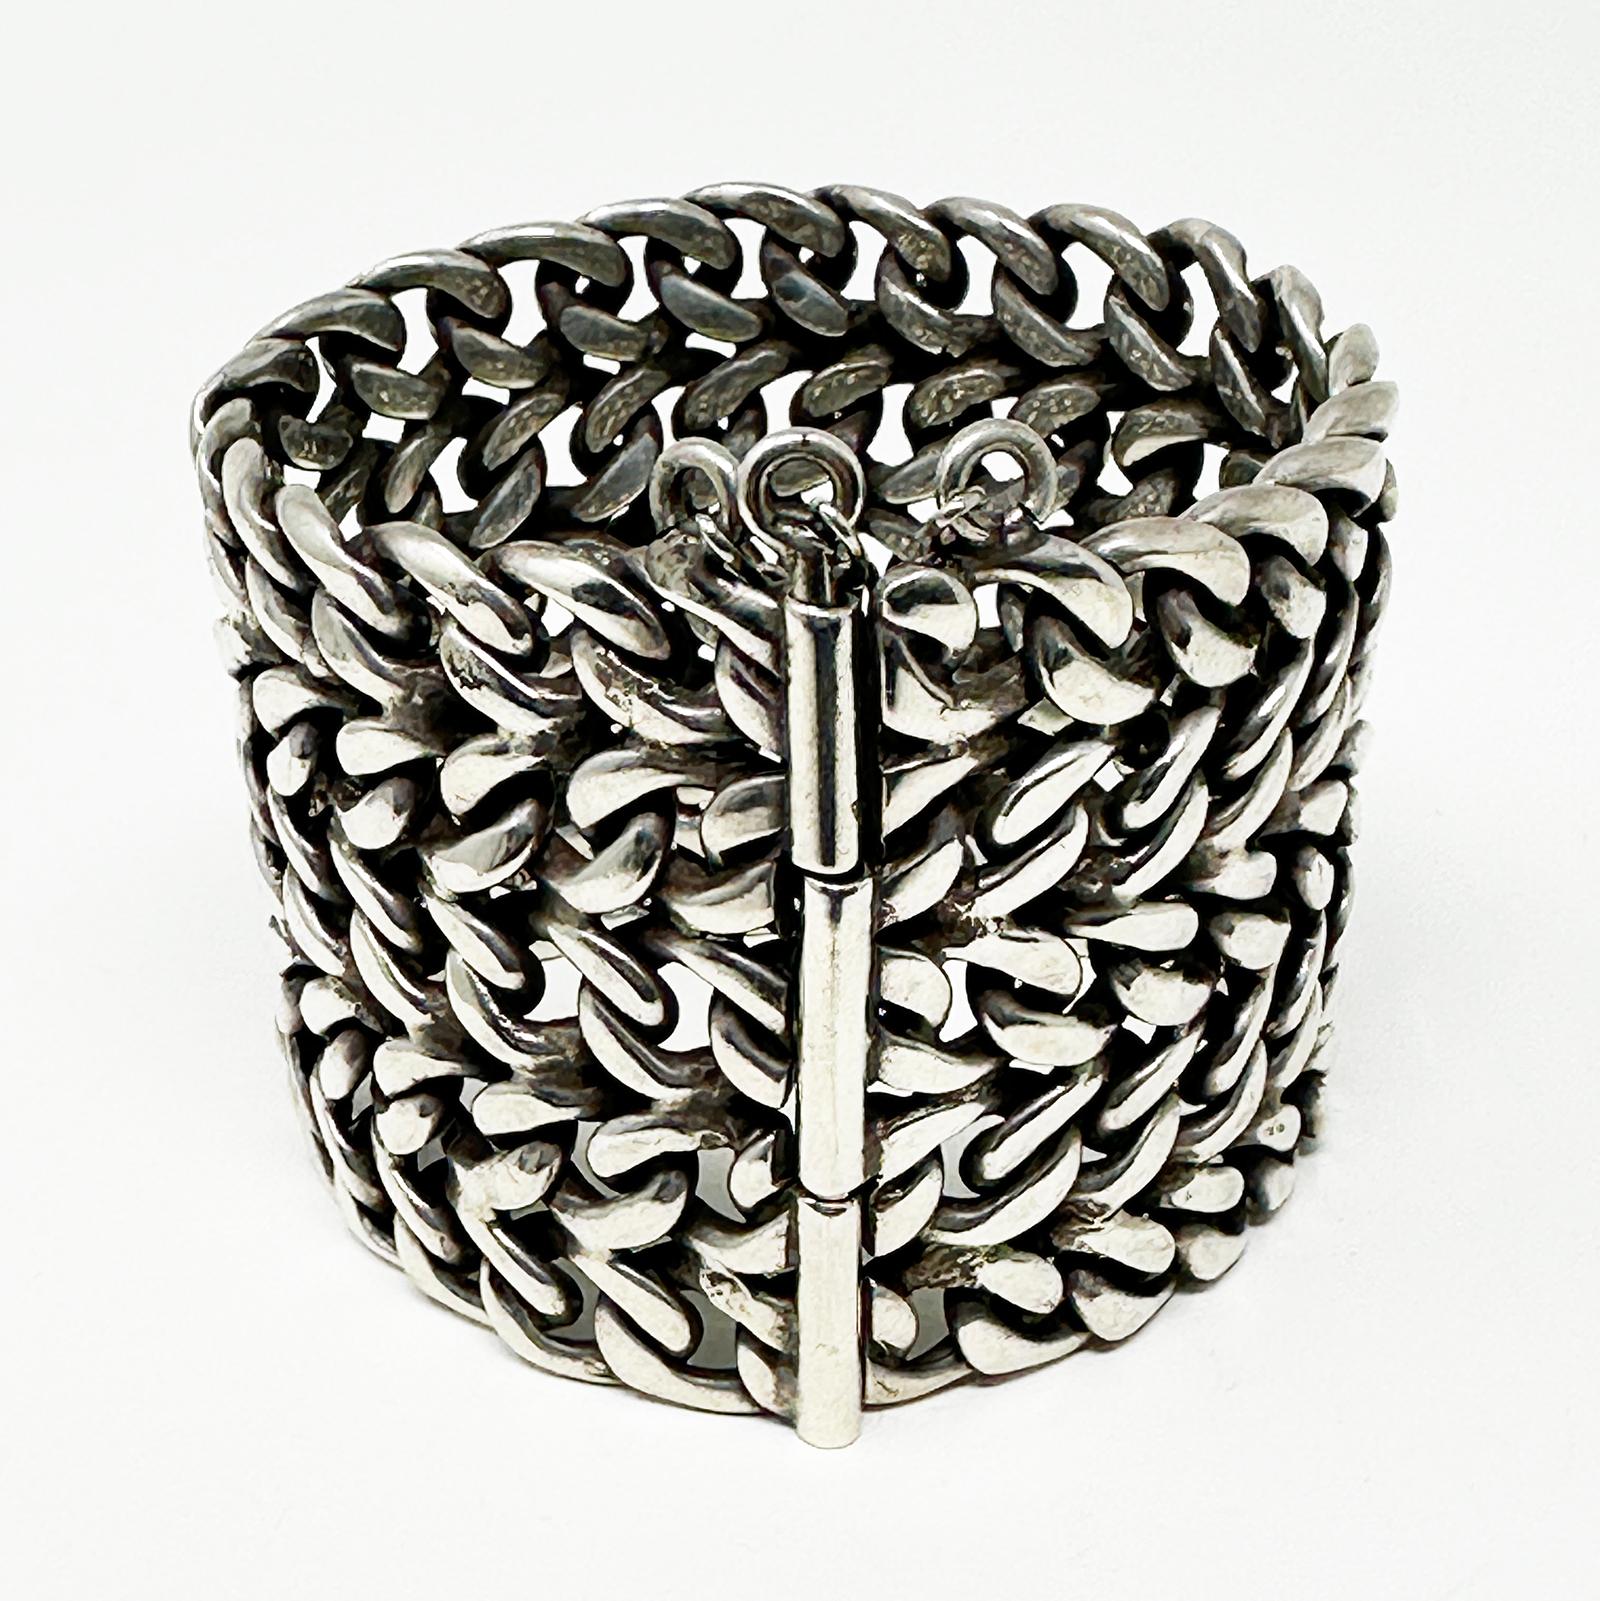 Contemporary Tribal Silver Chain Mesh Cuff from India

A substantial silver chain mesh cuff, made by Indian silversmiths in the second half of the 20th century.  It measures 2.25 inches high, the interior diameter is 2.25 inches and it weighs 243